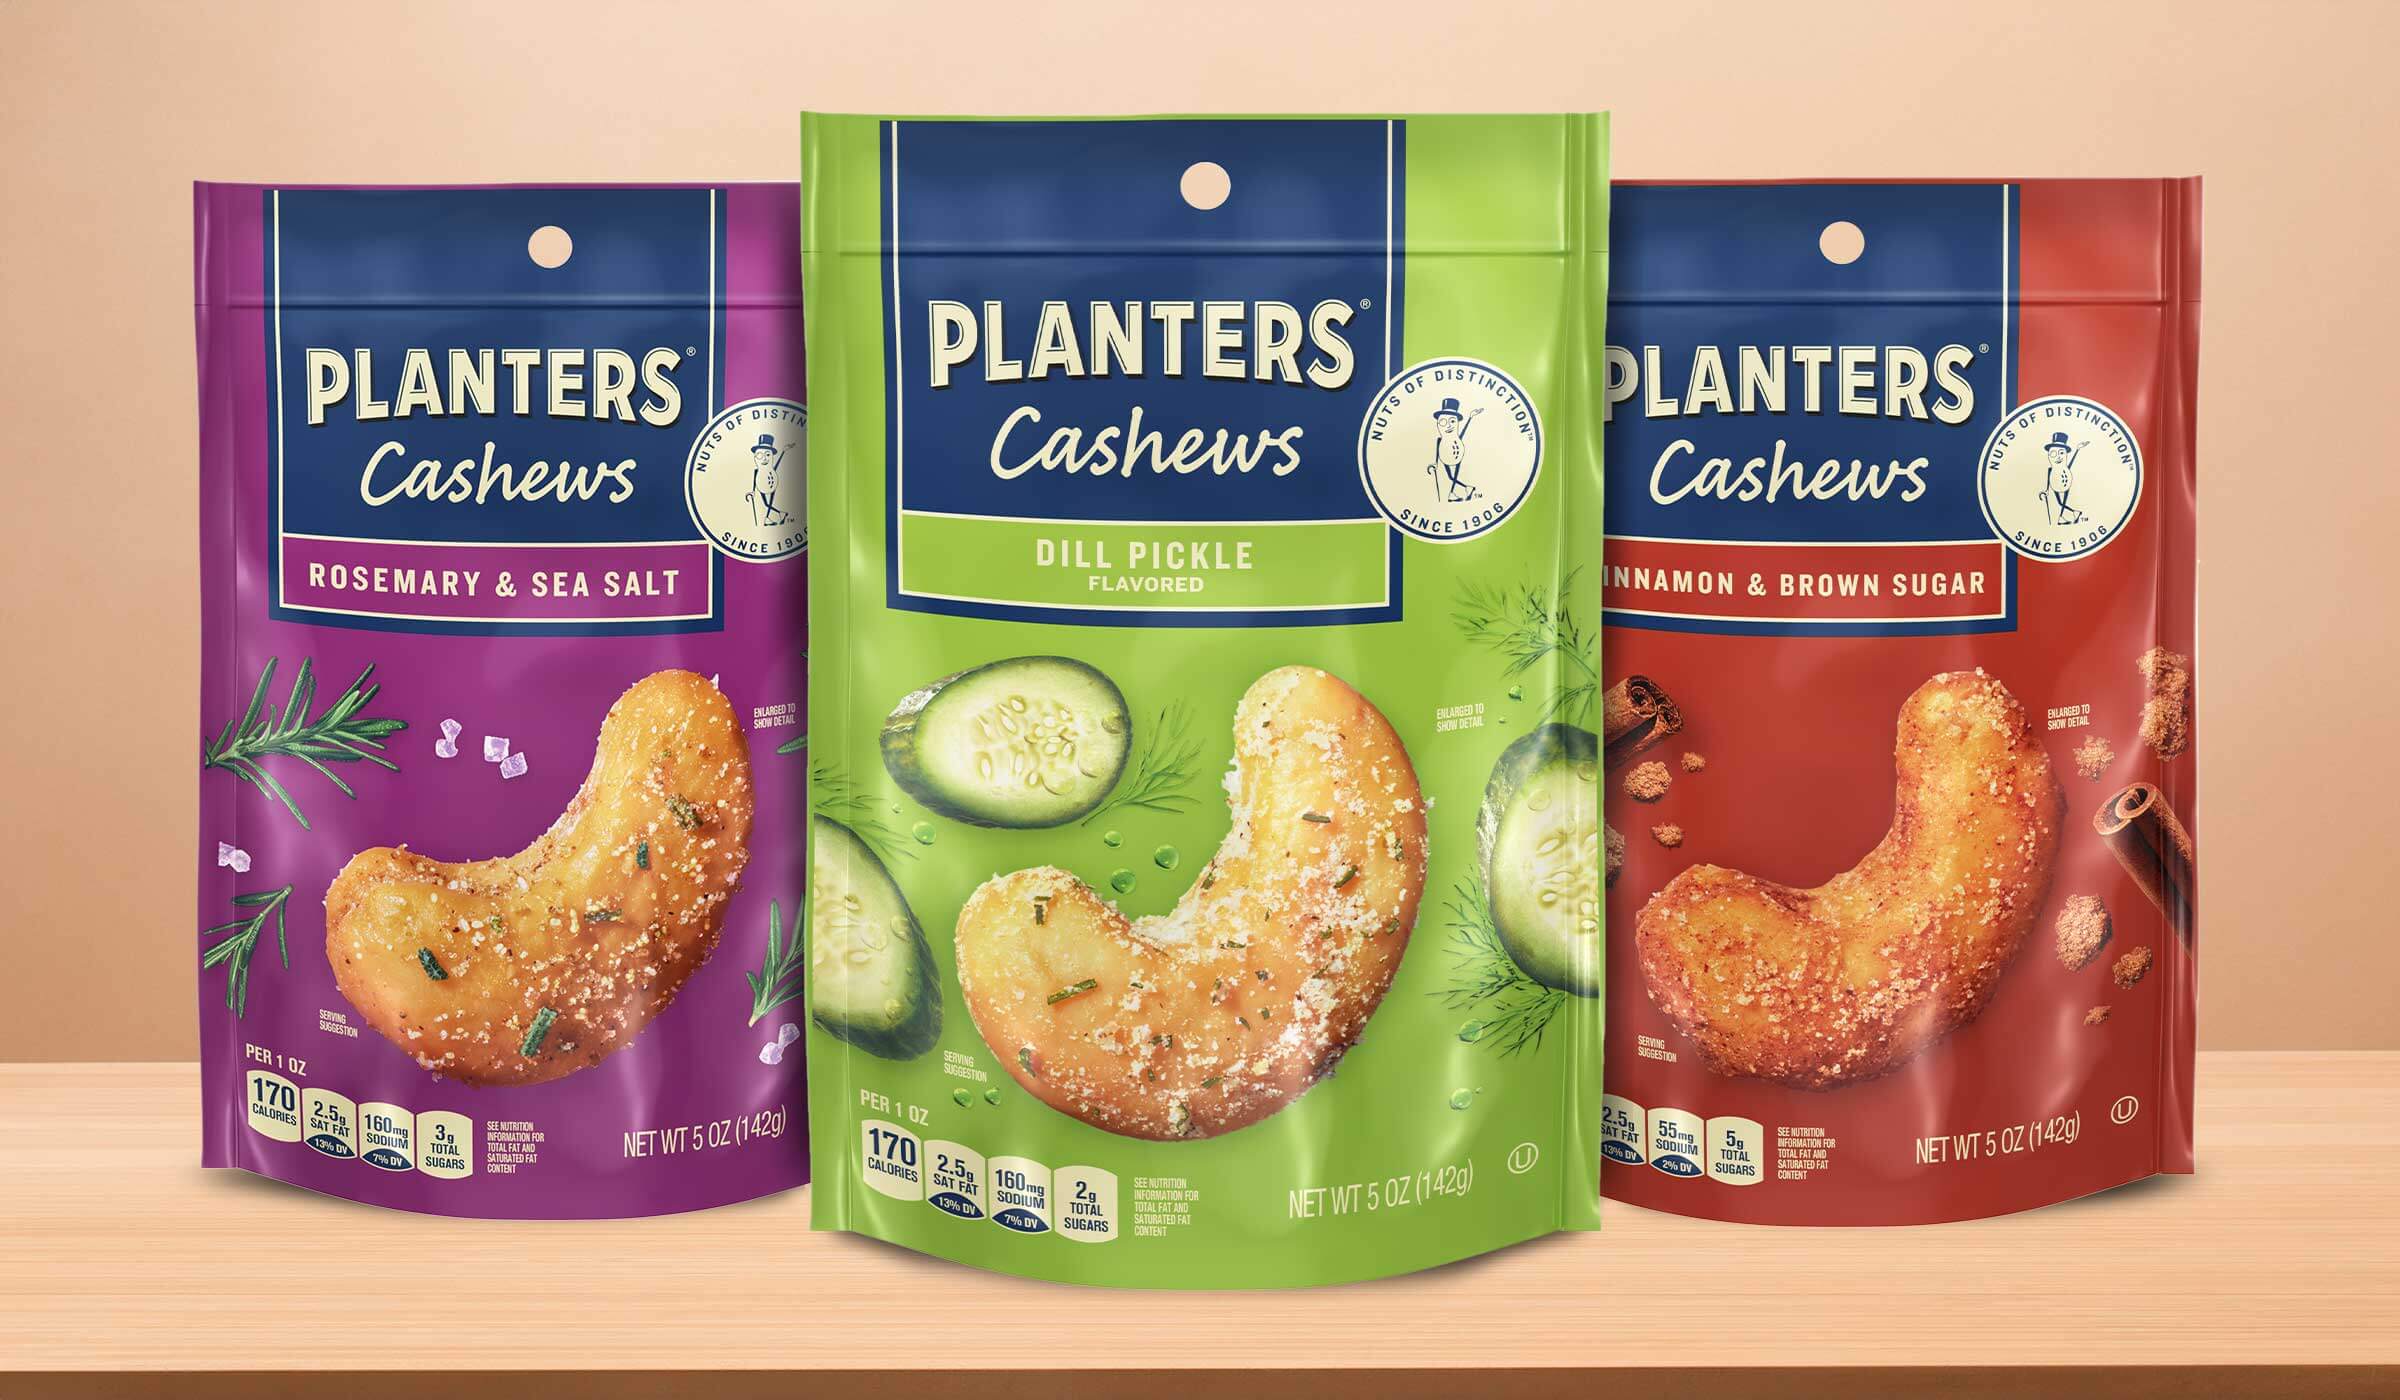 Planters rosemary and sea salt, dill pickle, and cinnamon and brown sugar cashews in their packaging on a table